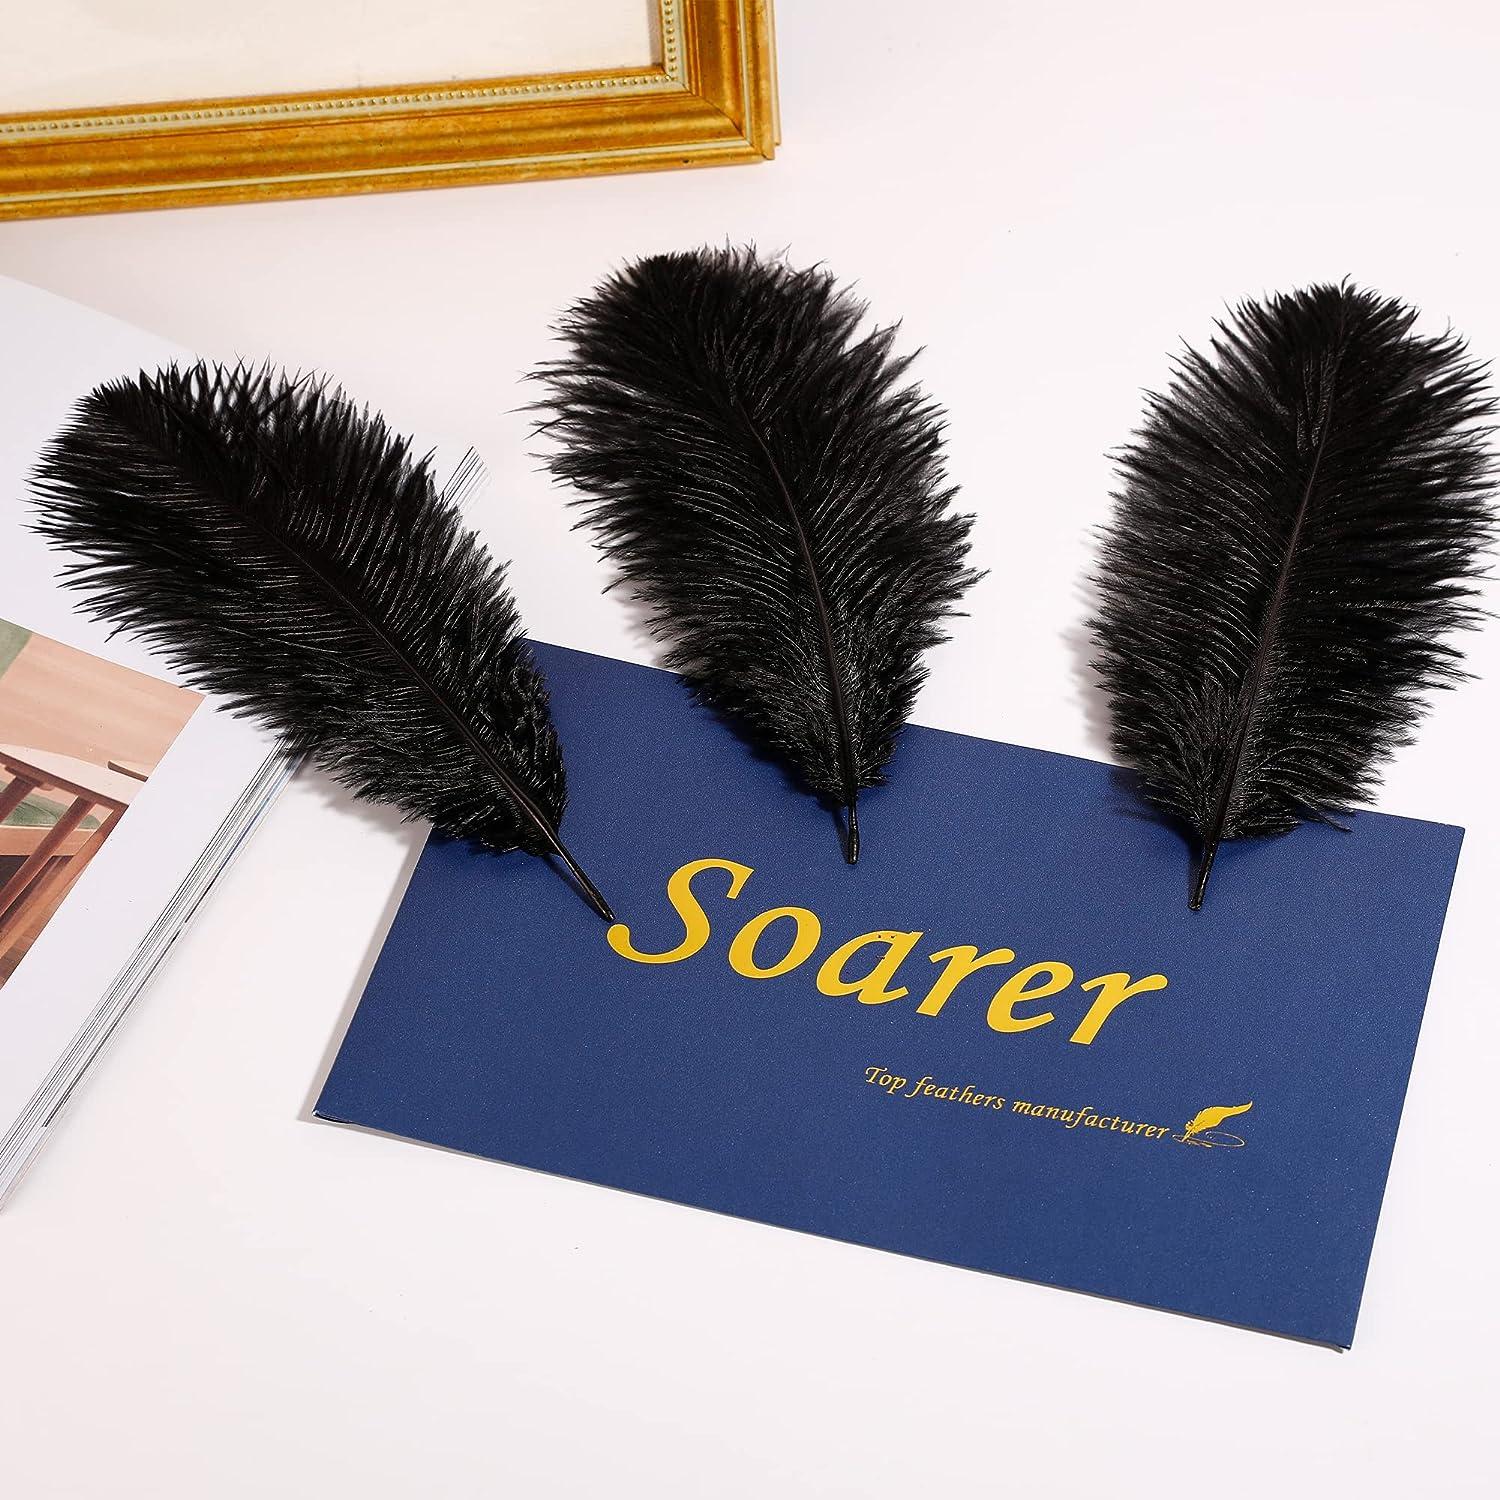 Soarer Black Ostrich Feathers Bulk - 30pcs 8-10 inches for Wedding Party  Centerpieces, Home Decorations and DIY Crafts(Black)